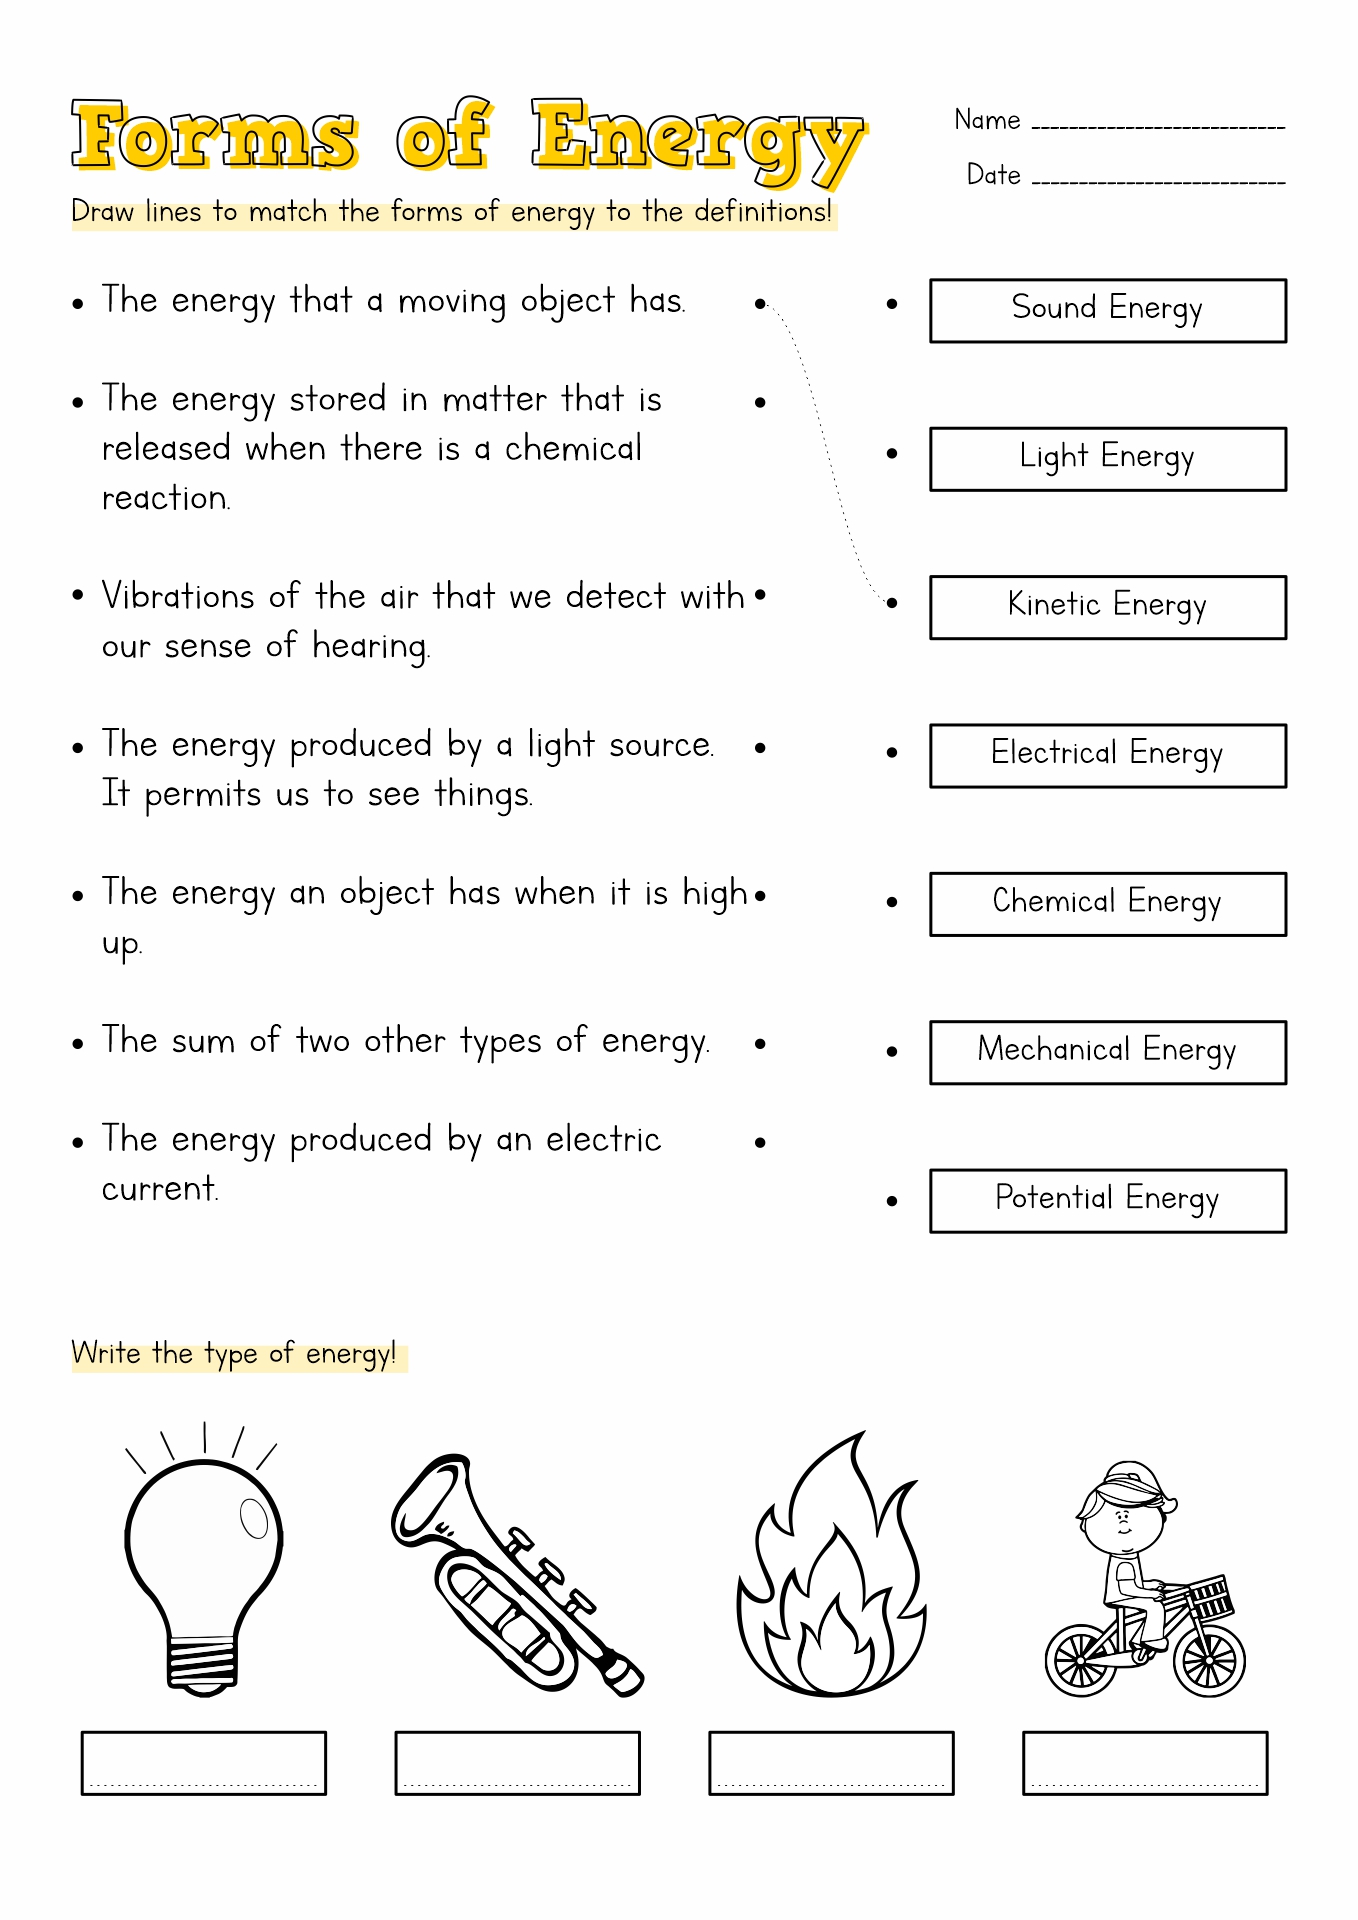 Energy Forms Worksheets Image